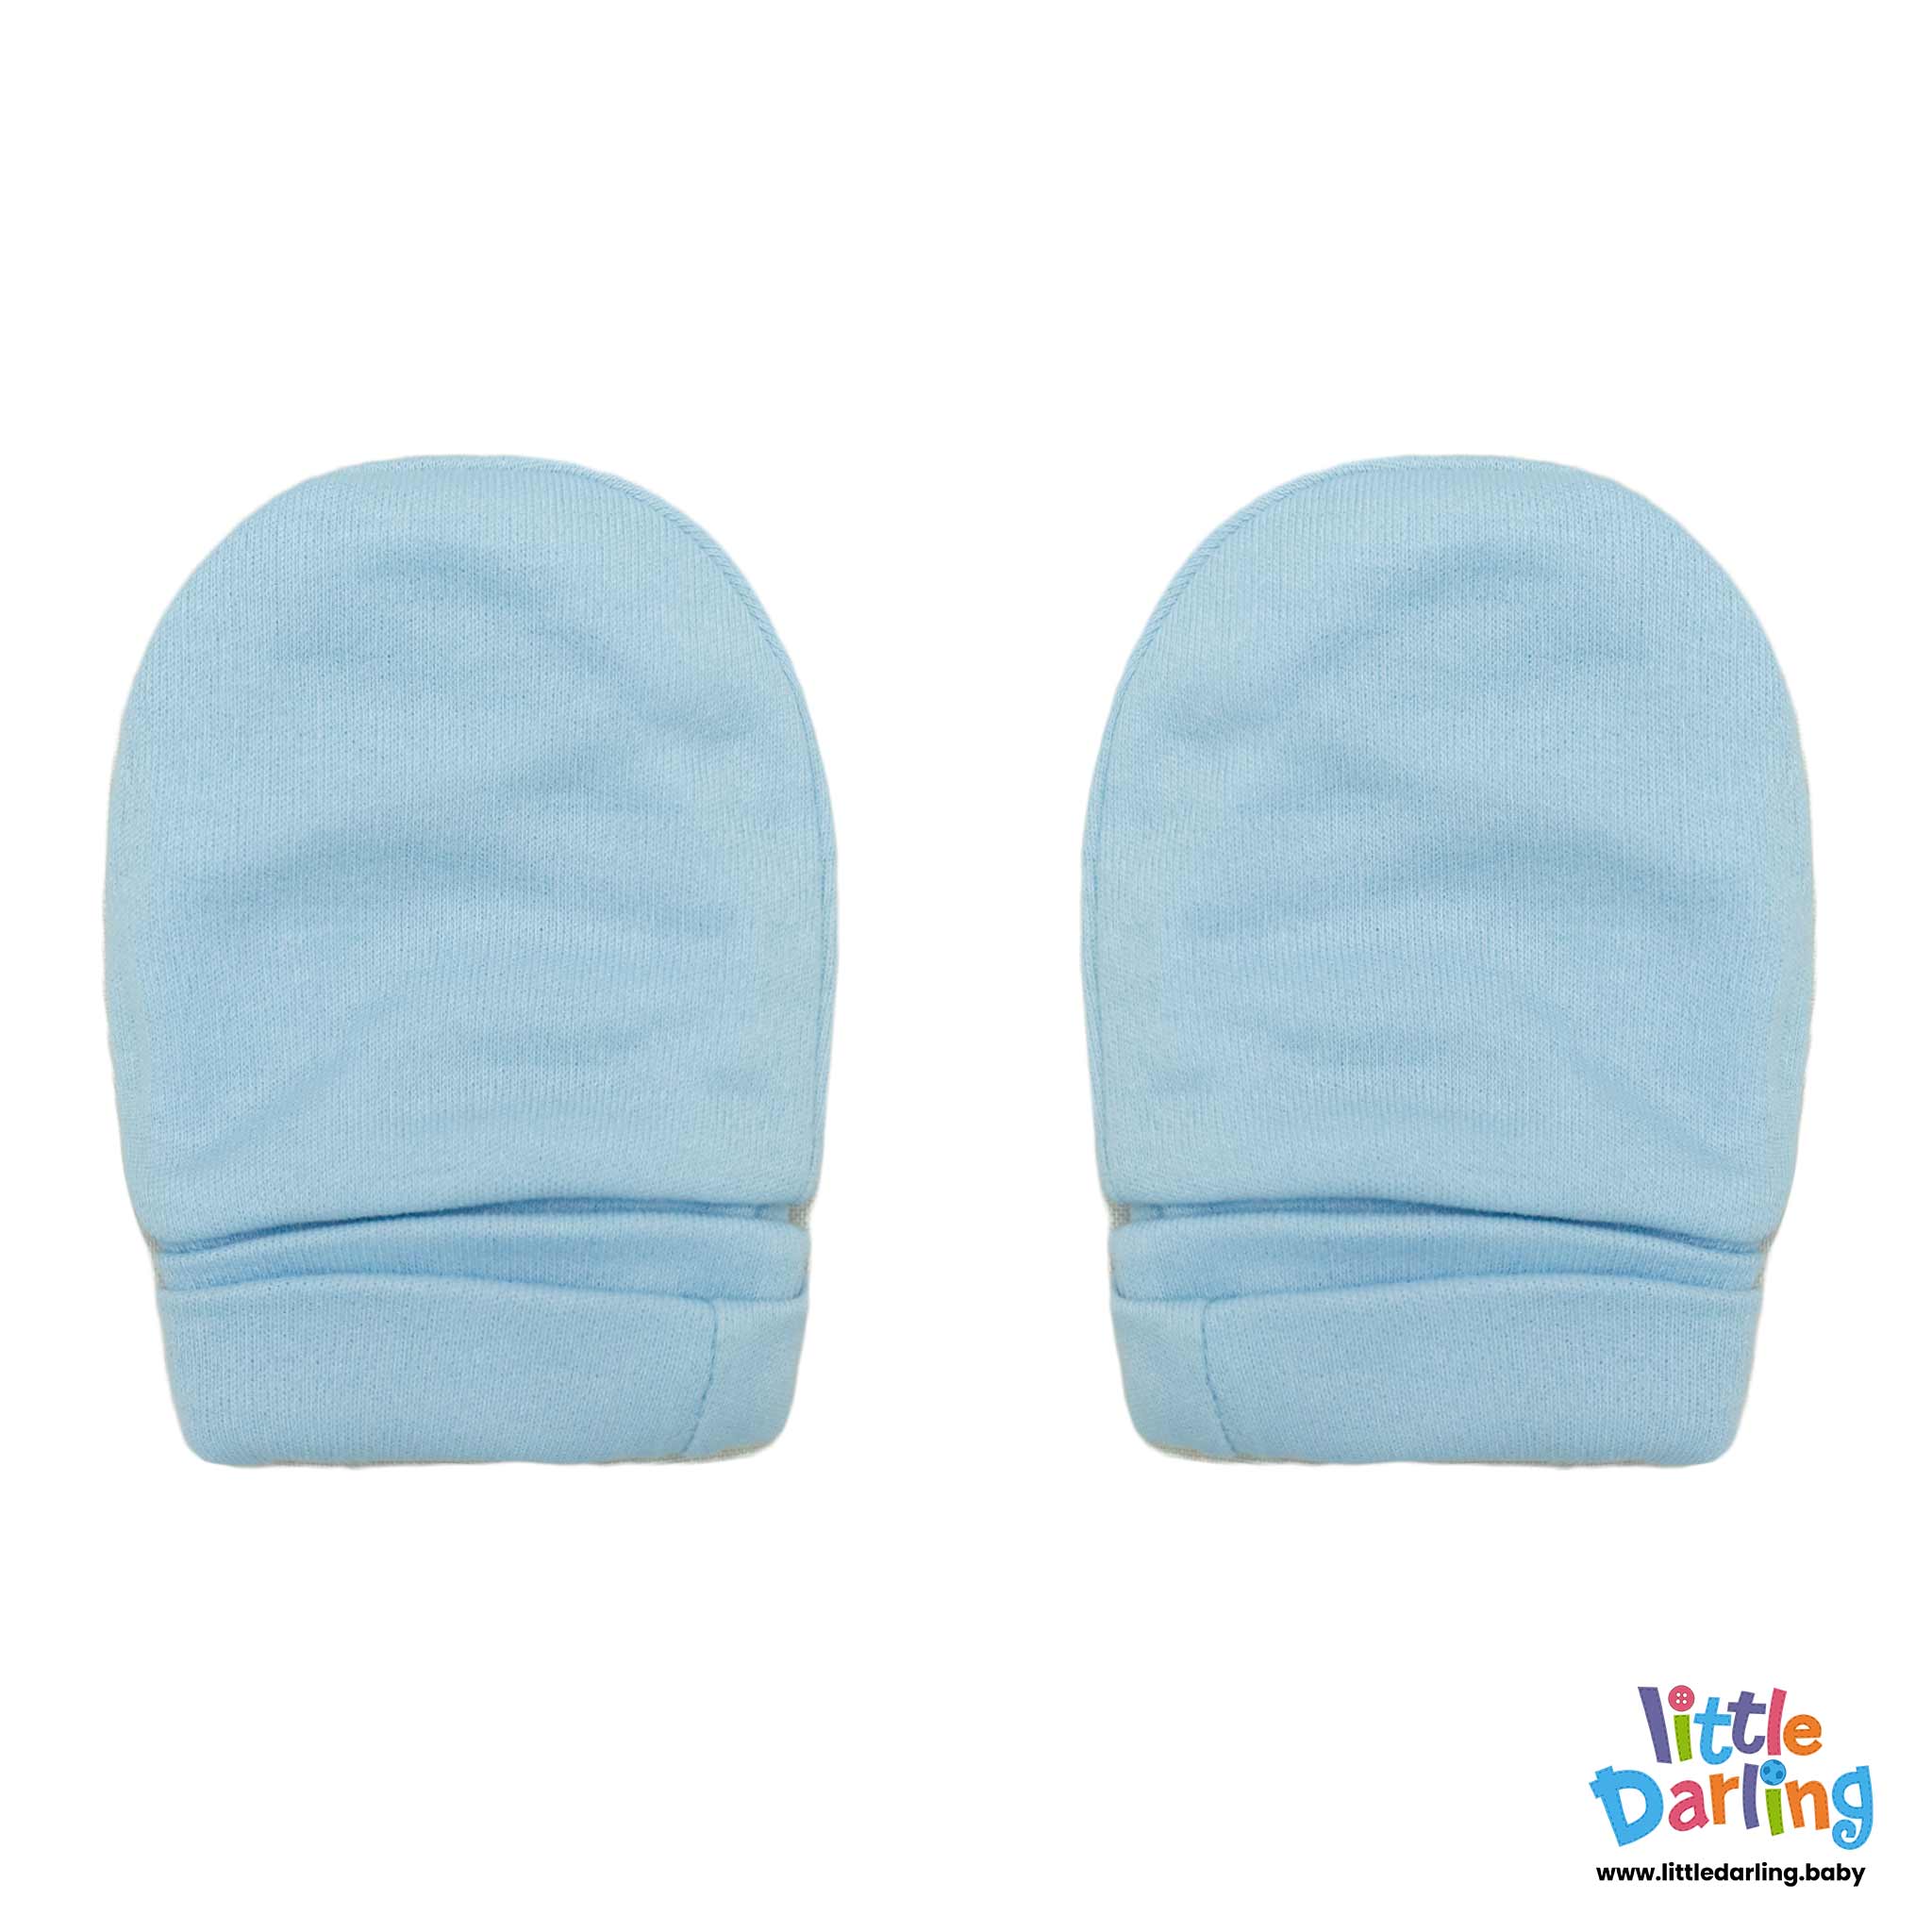 Baby Mittens Pair Pk Of 2 Truck & Car Sky Blue Color by Little Darling